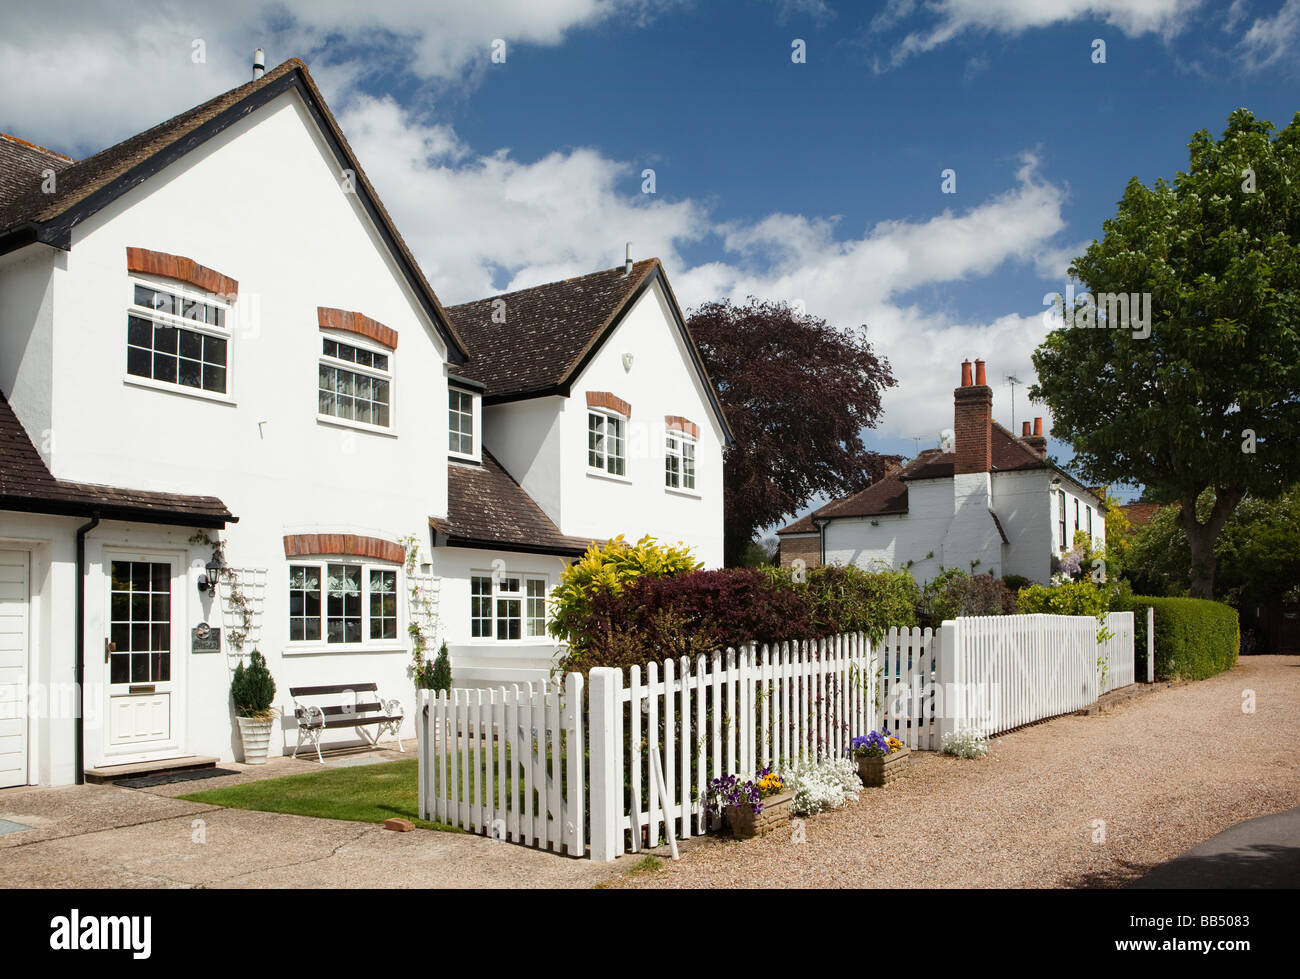 England Berkshire Bray Village Bettoney Vere row of white painted suburban houses with white picket fence Stock Photo